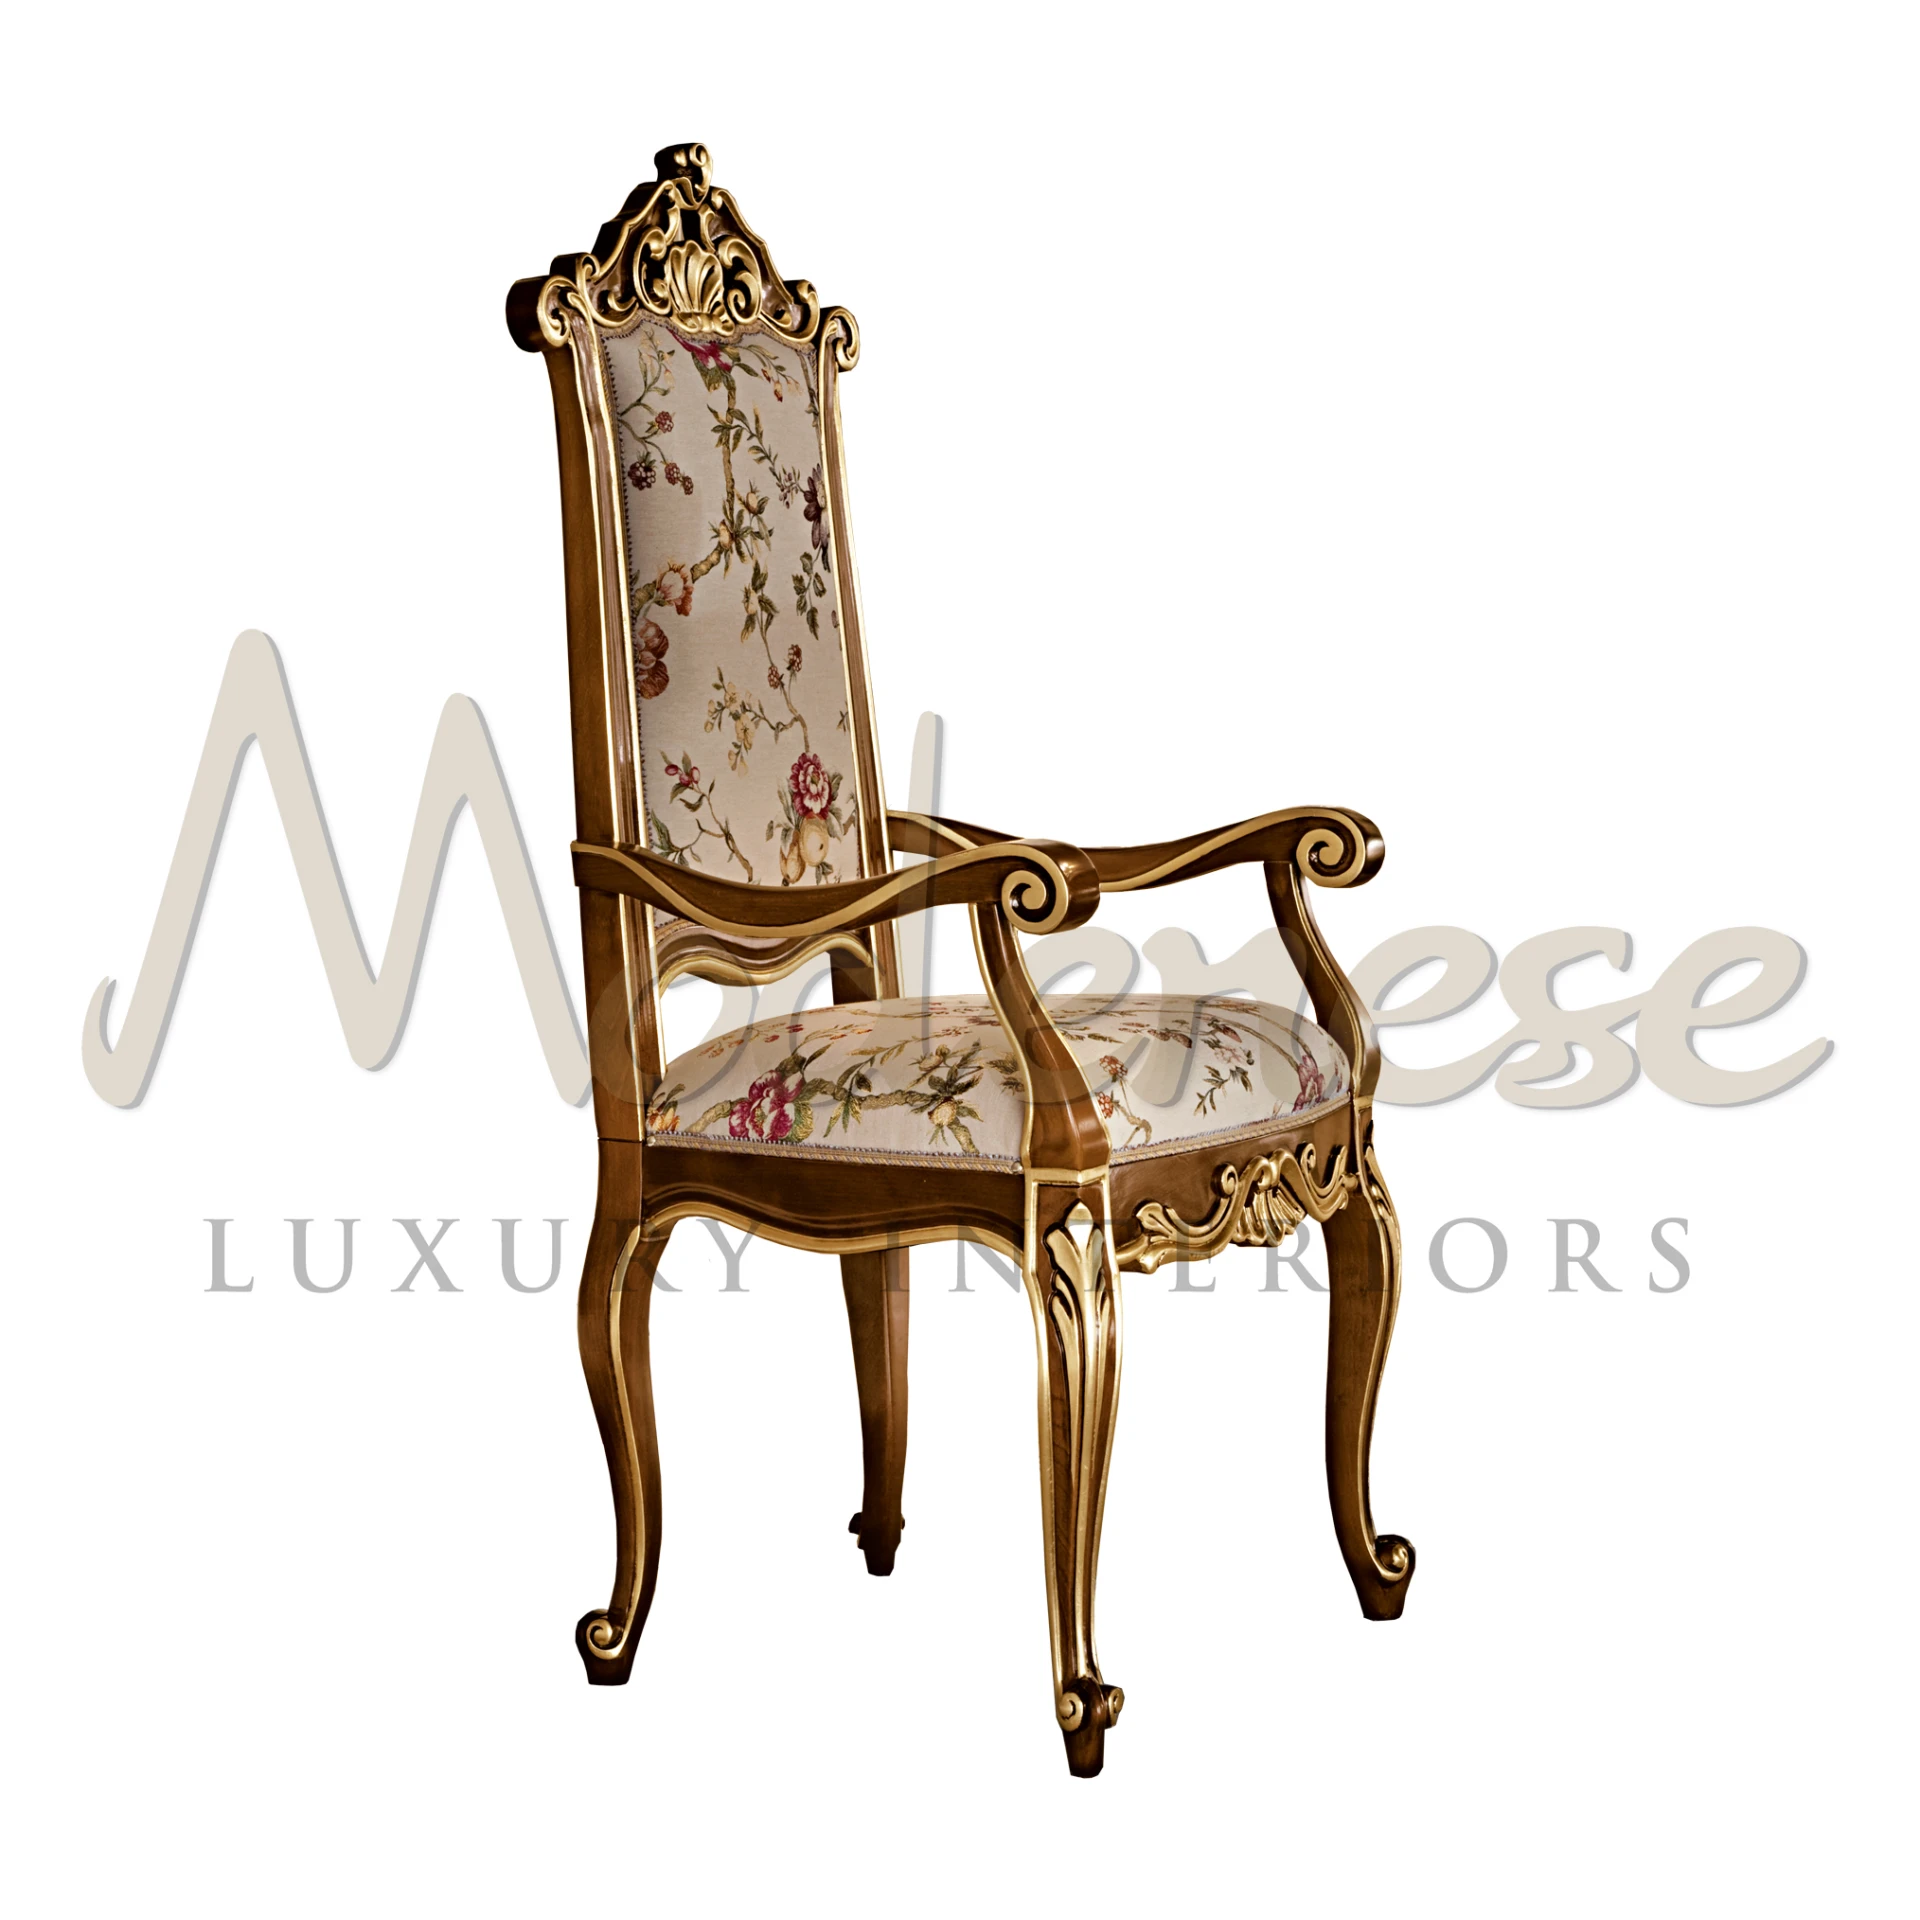 Experience palatial settings with this shiny dining chair featuring gold leaf accents, walnut finish, and luxurious floral upholstery.